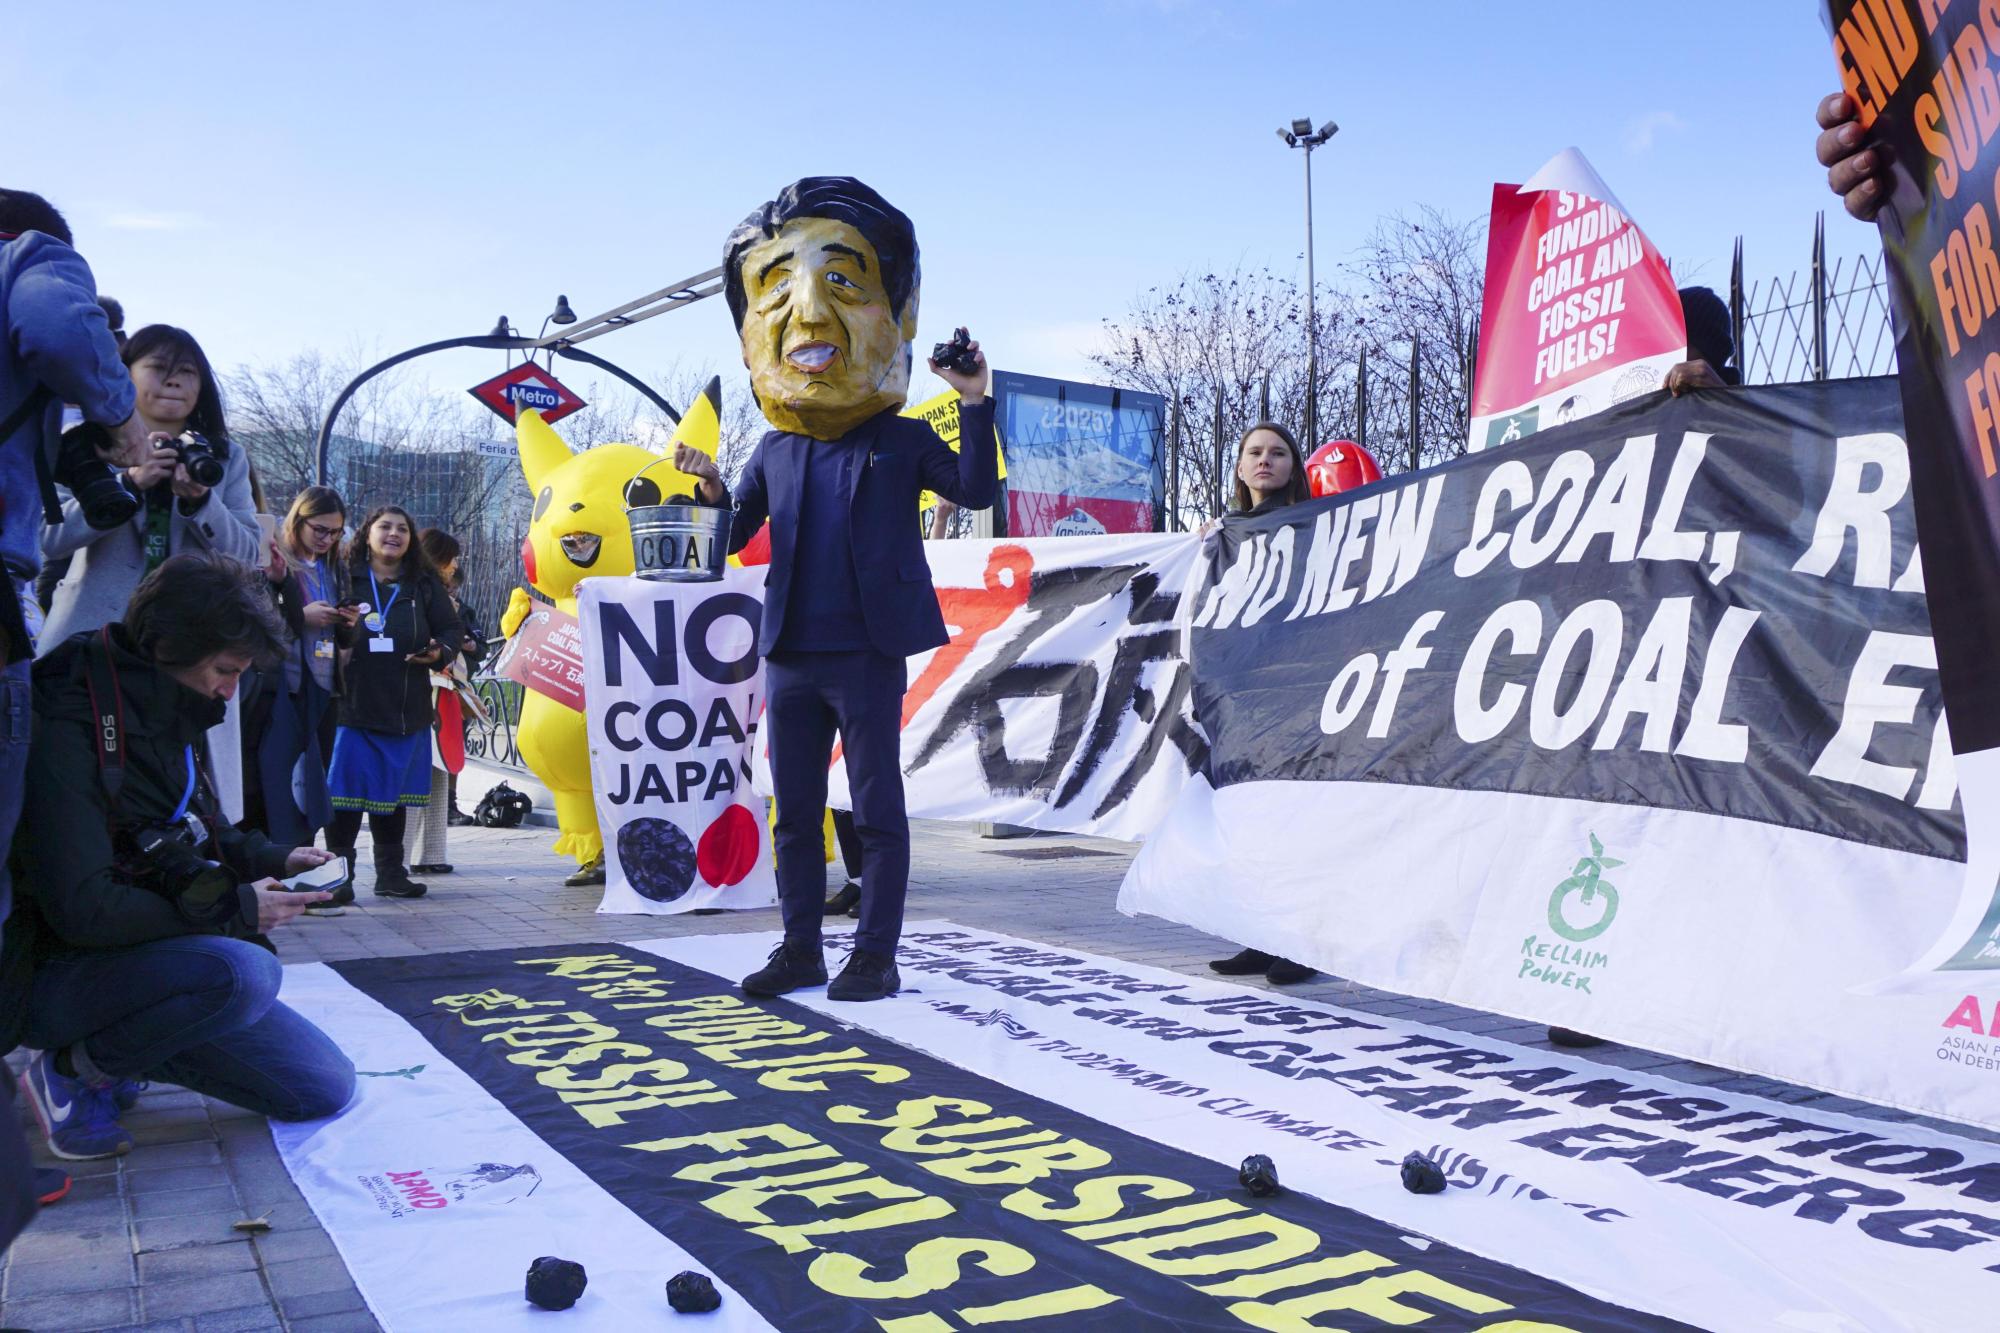 Members of environmental groups stage a protest near the venue of a U.N. Climate Change Conference, known as COP25, in Madrid on Thursday, calling for Japan to abolish coal-fired power generation. | KYODO